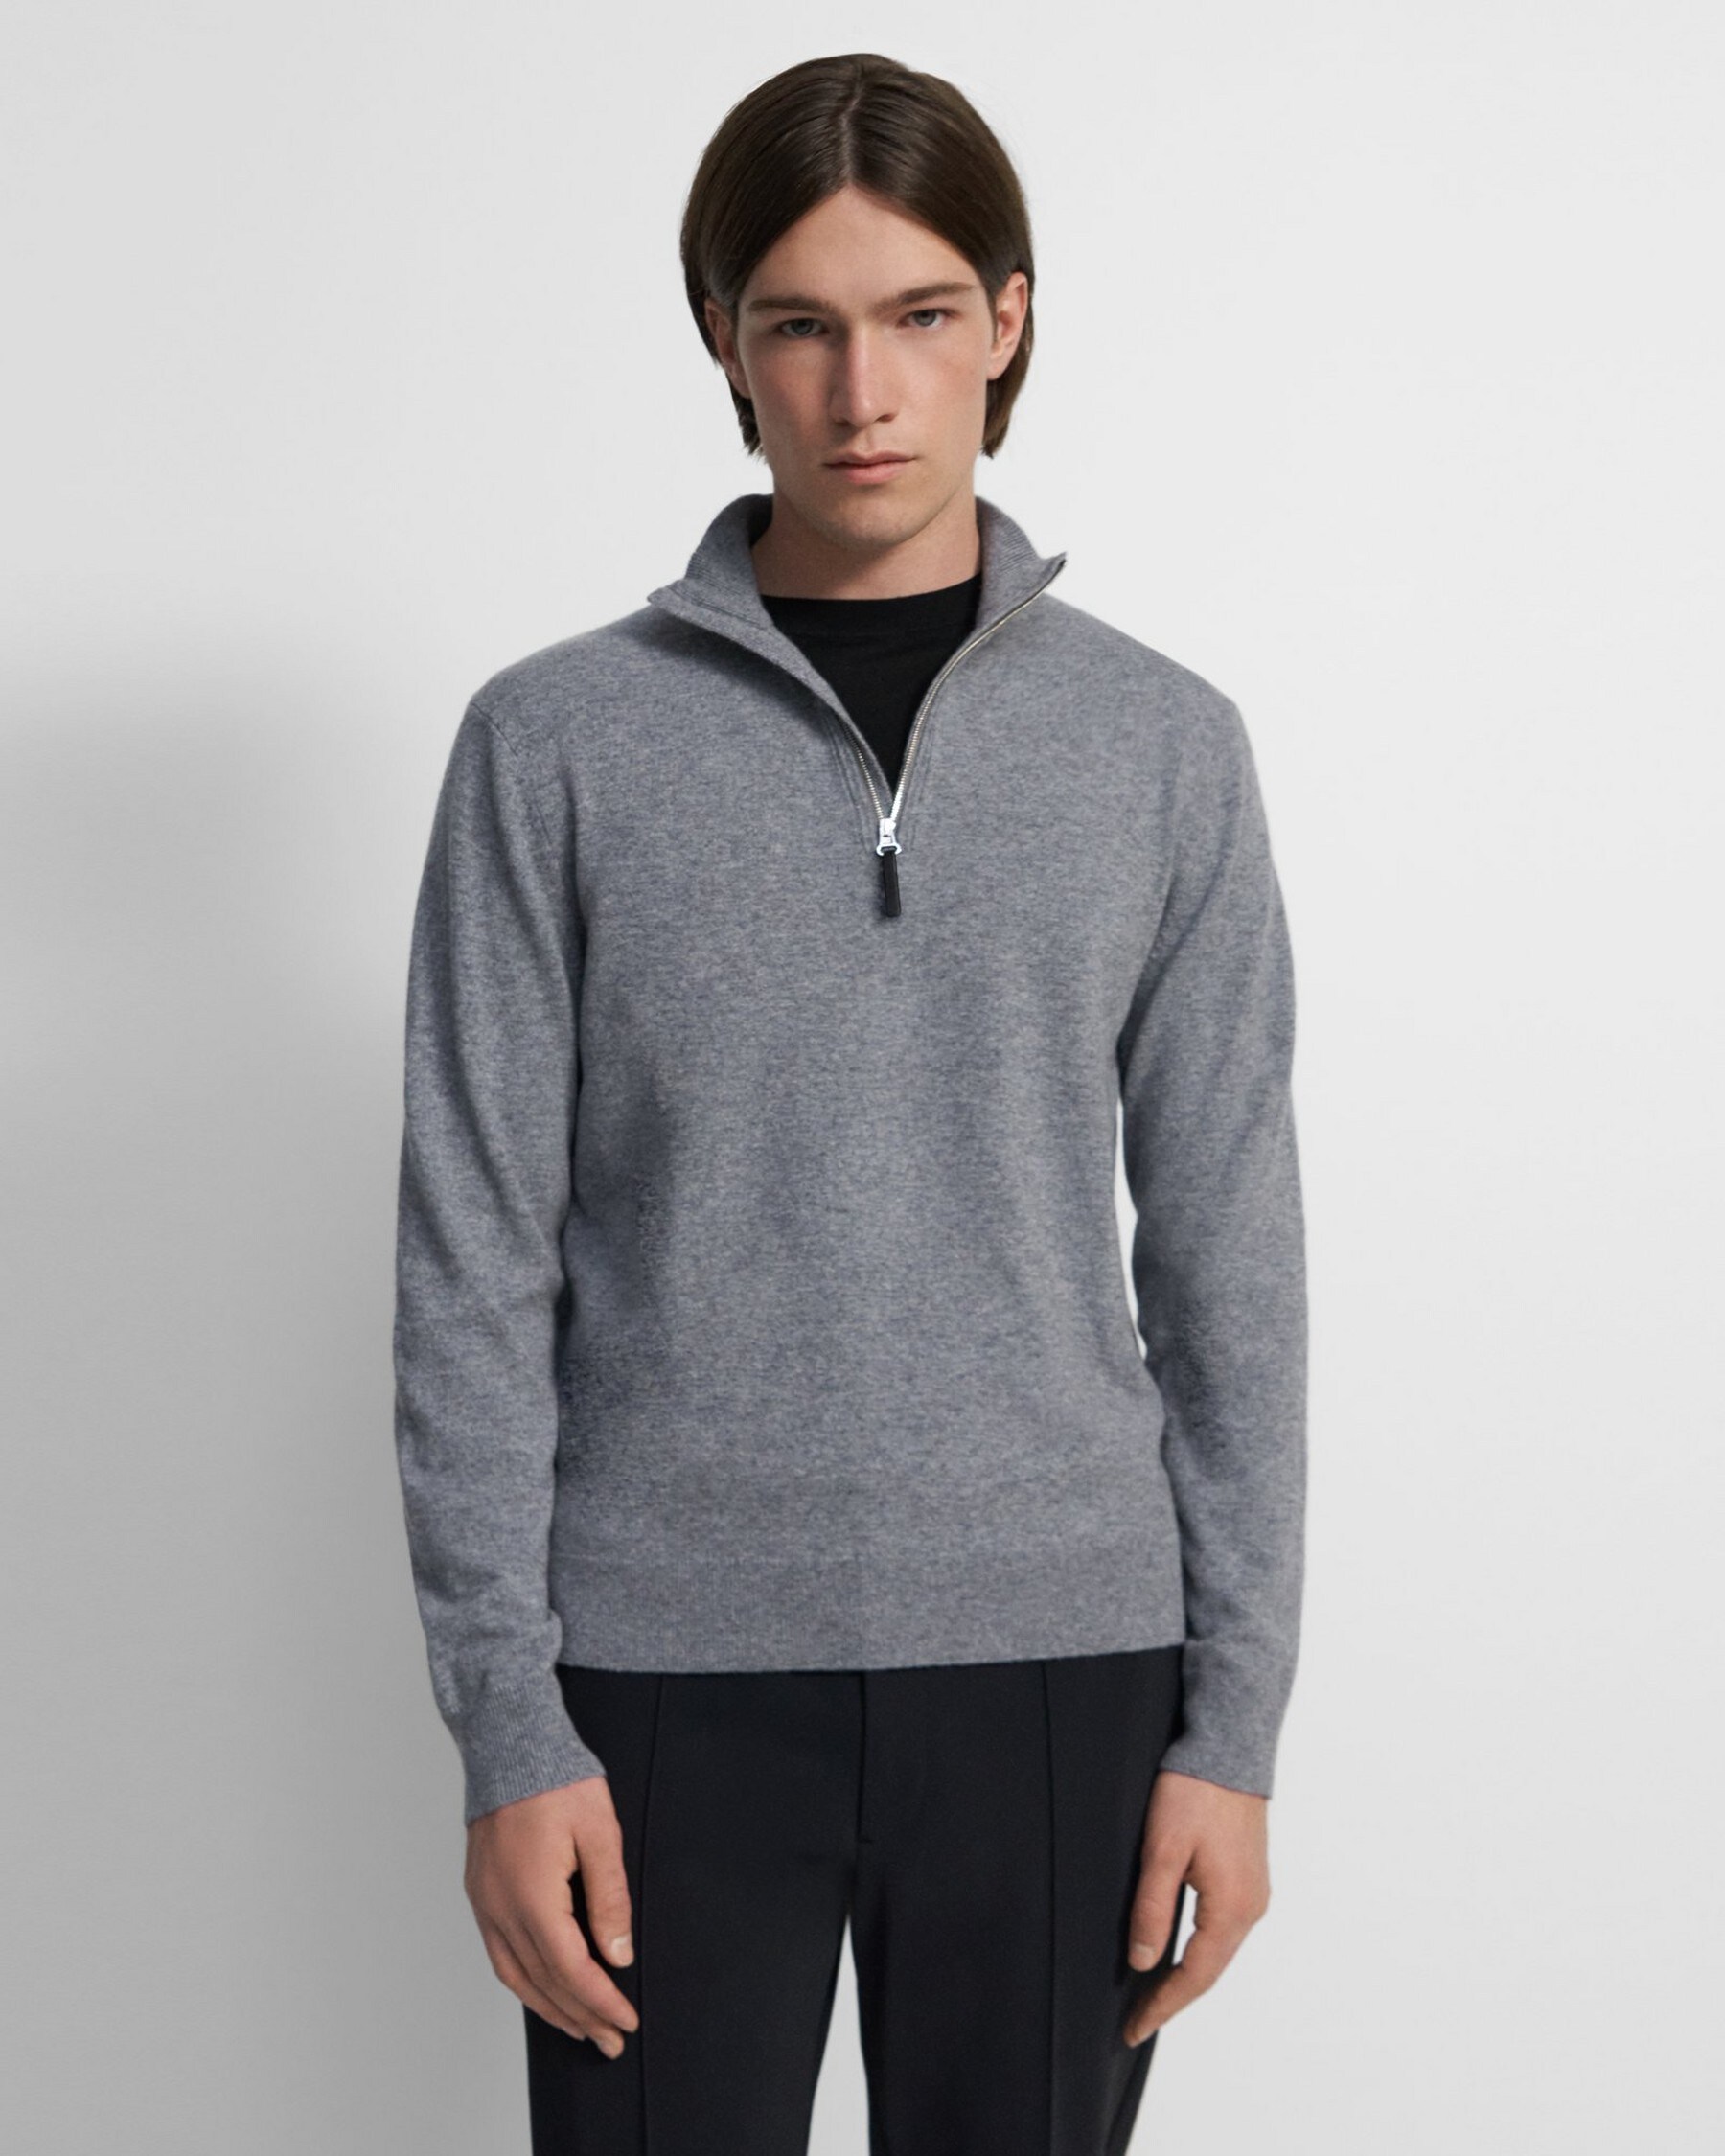 Theory Hilles Quarter-Zip Sweater in Cashmere